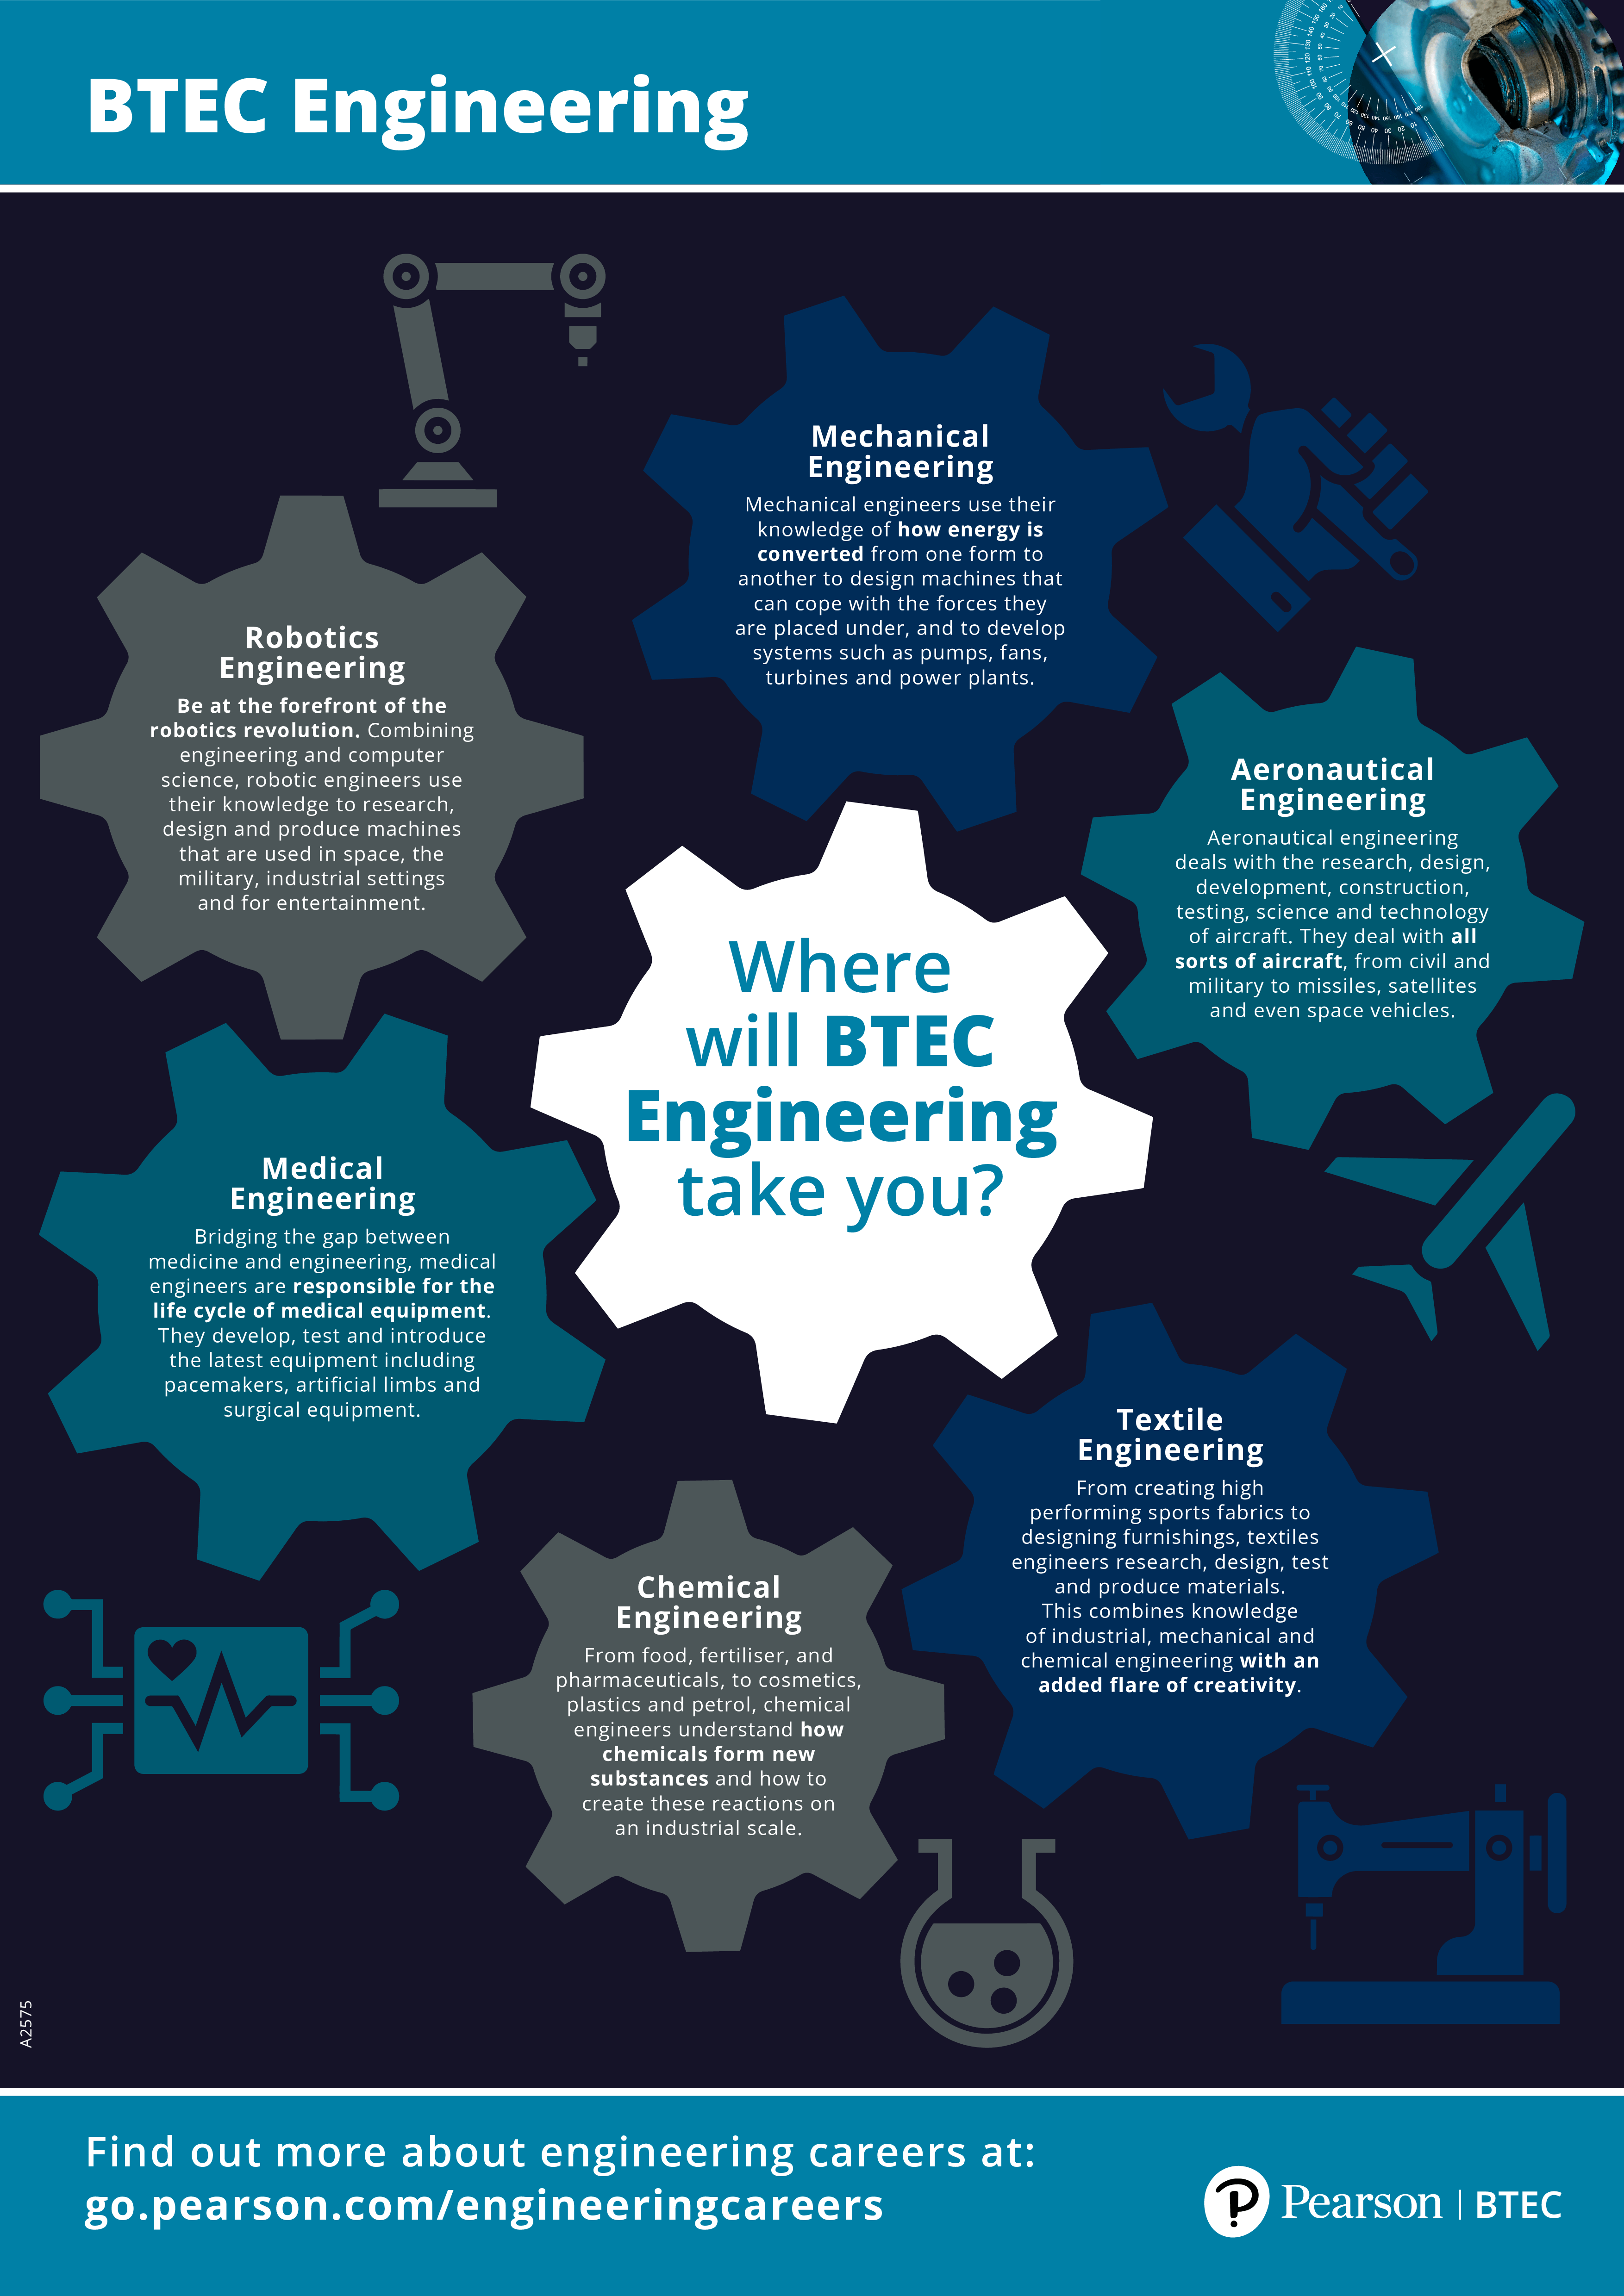 Where will BTEC Engineering take you?